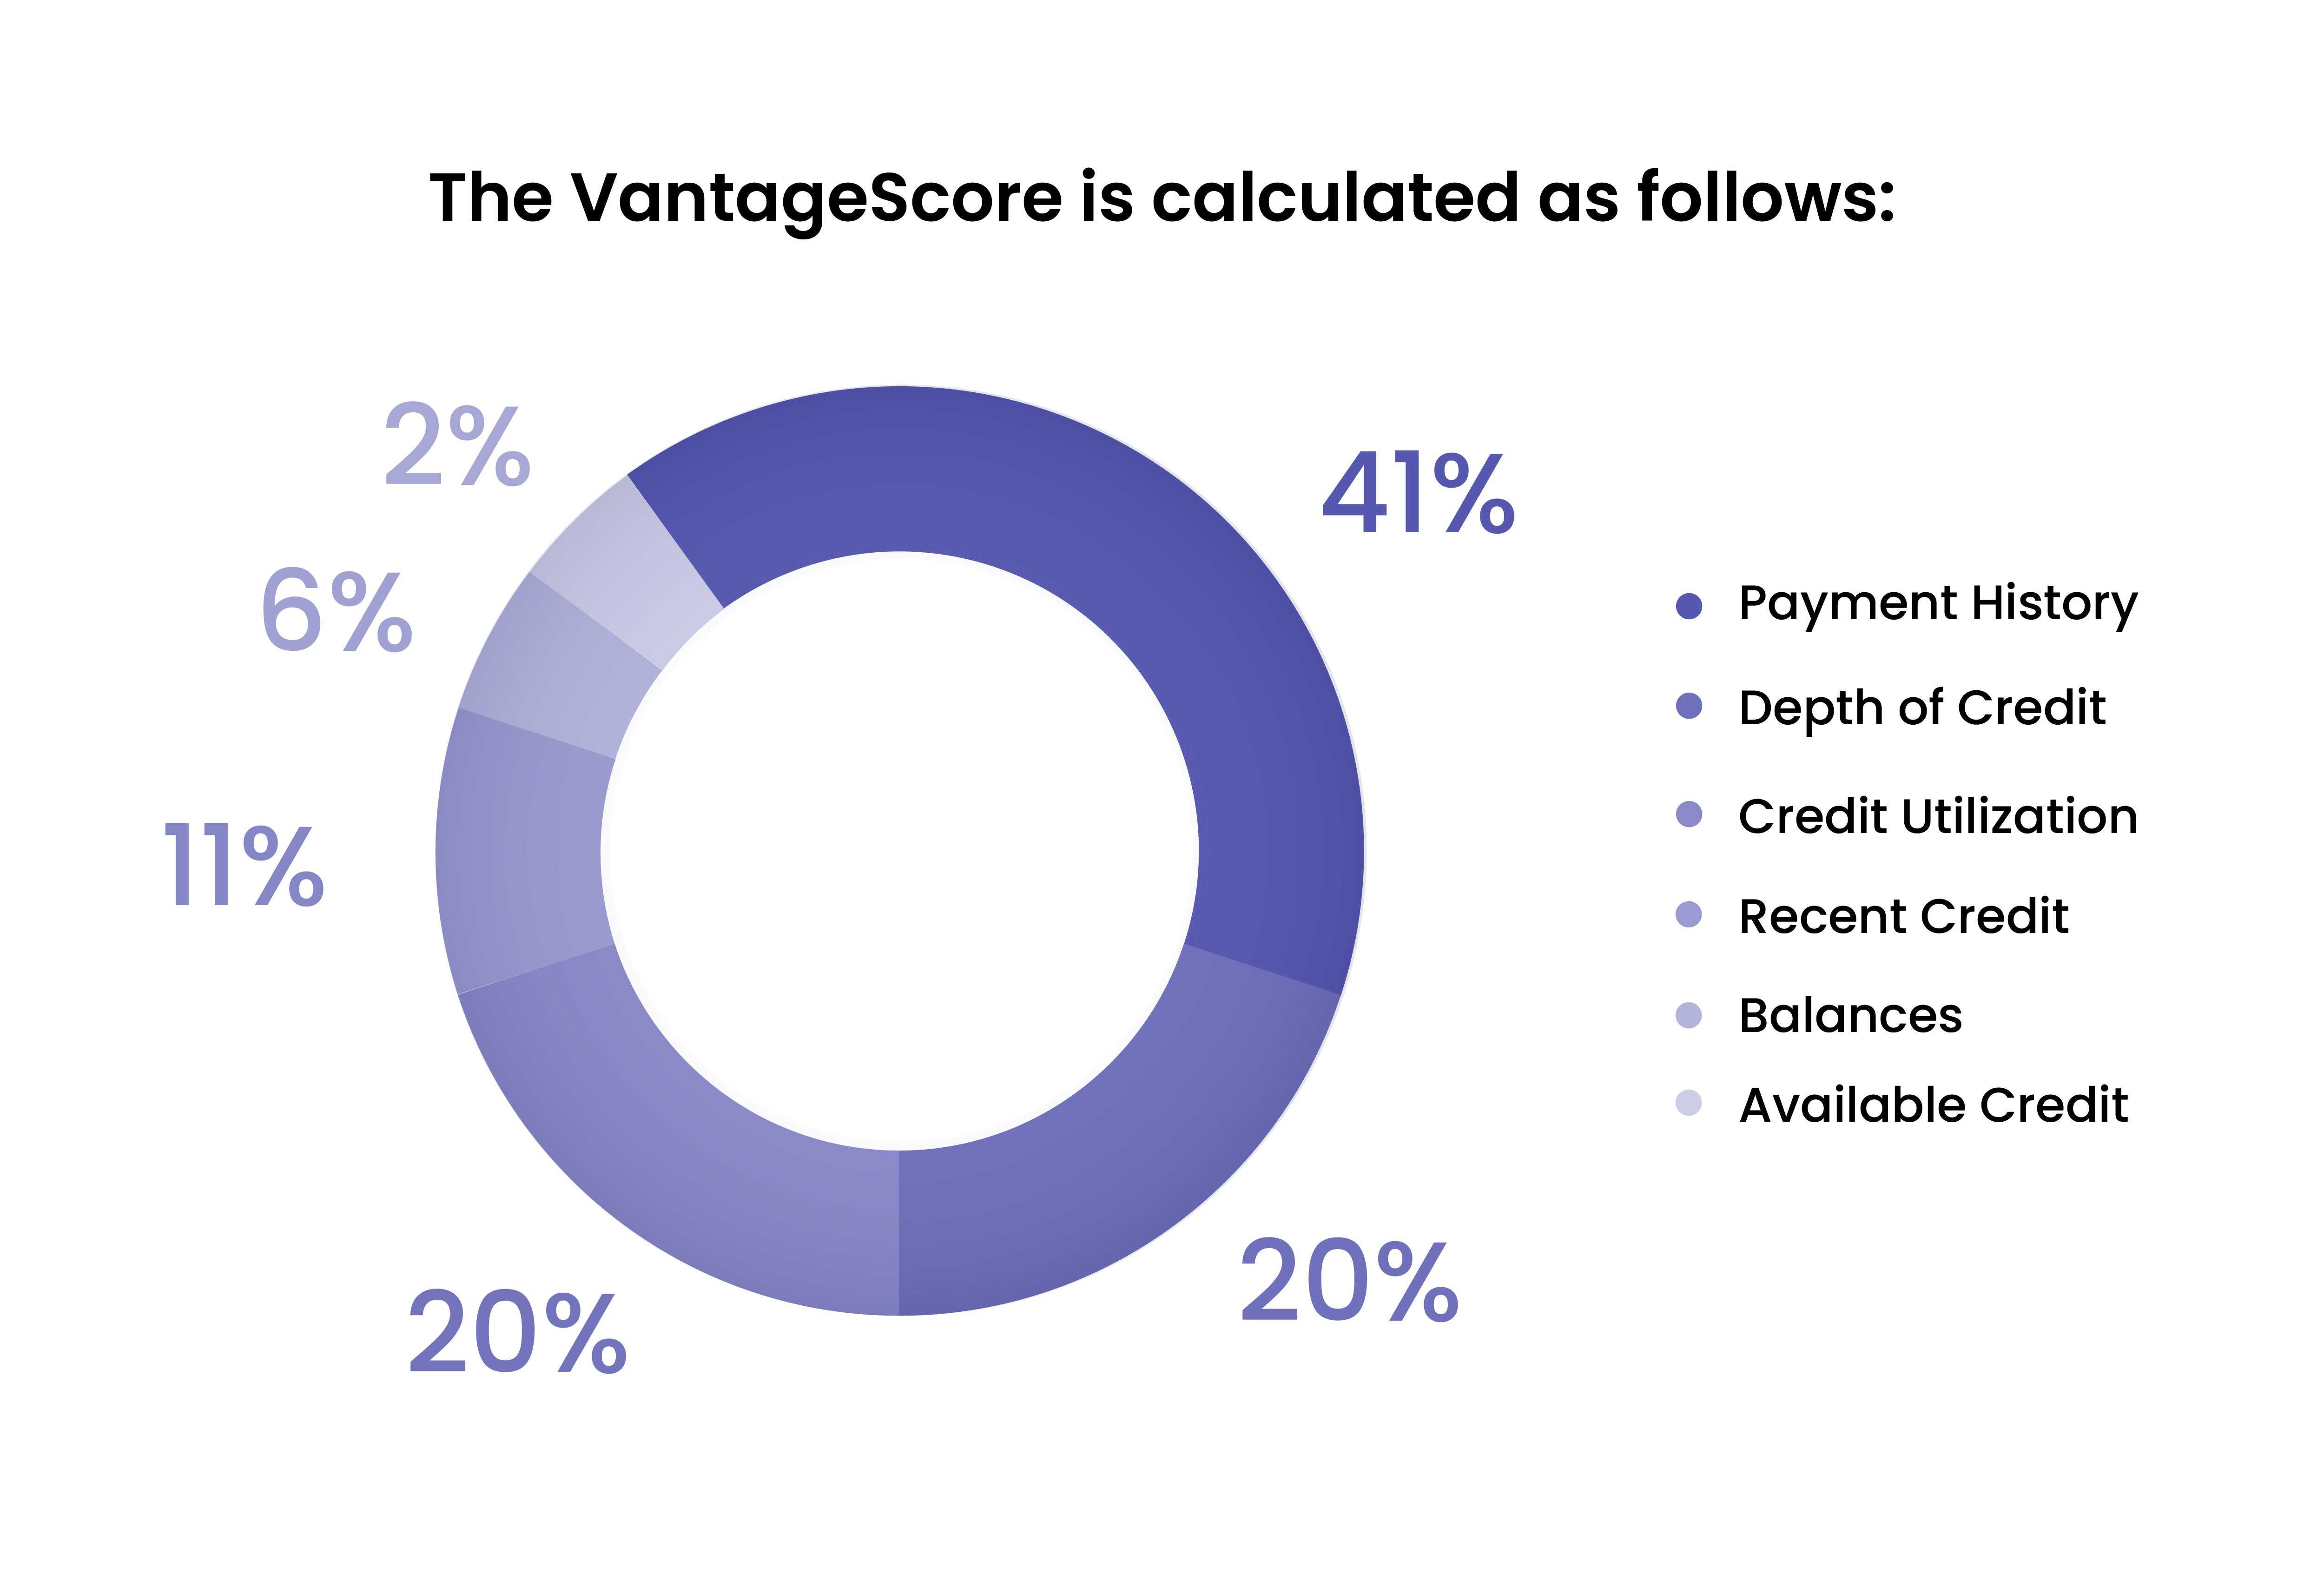 How your VantageScore is calculated which can determine whether you have good or bad credit